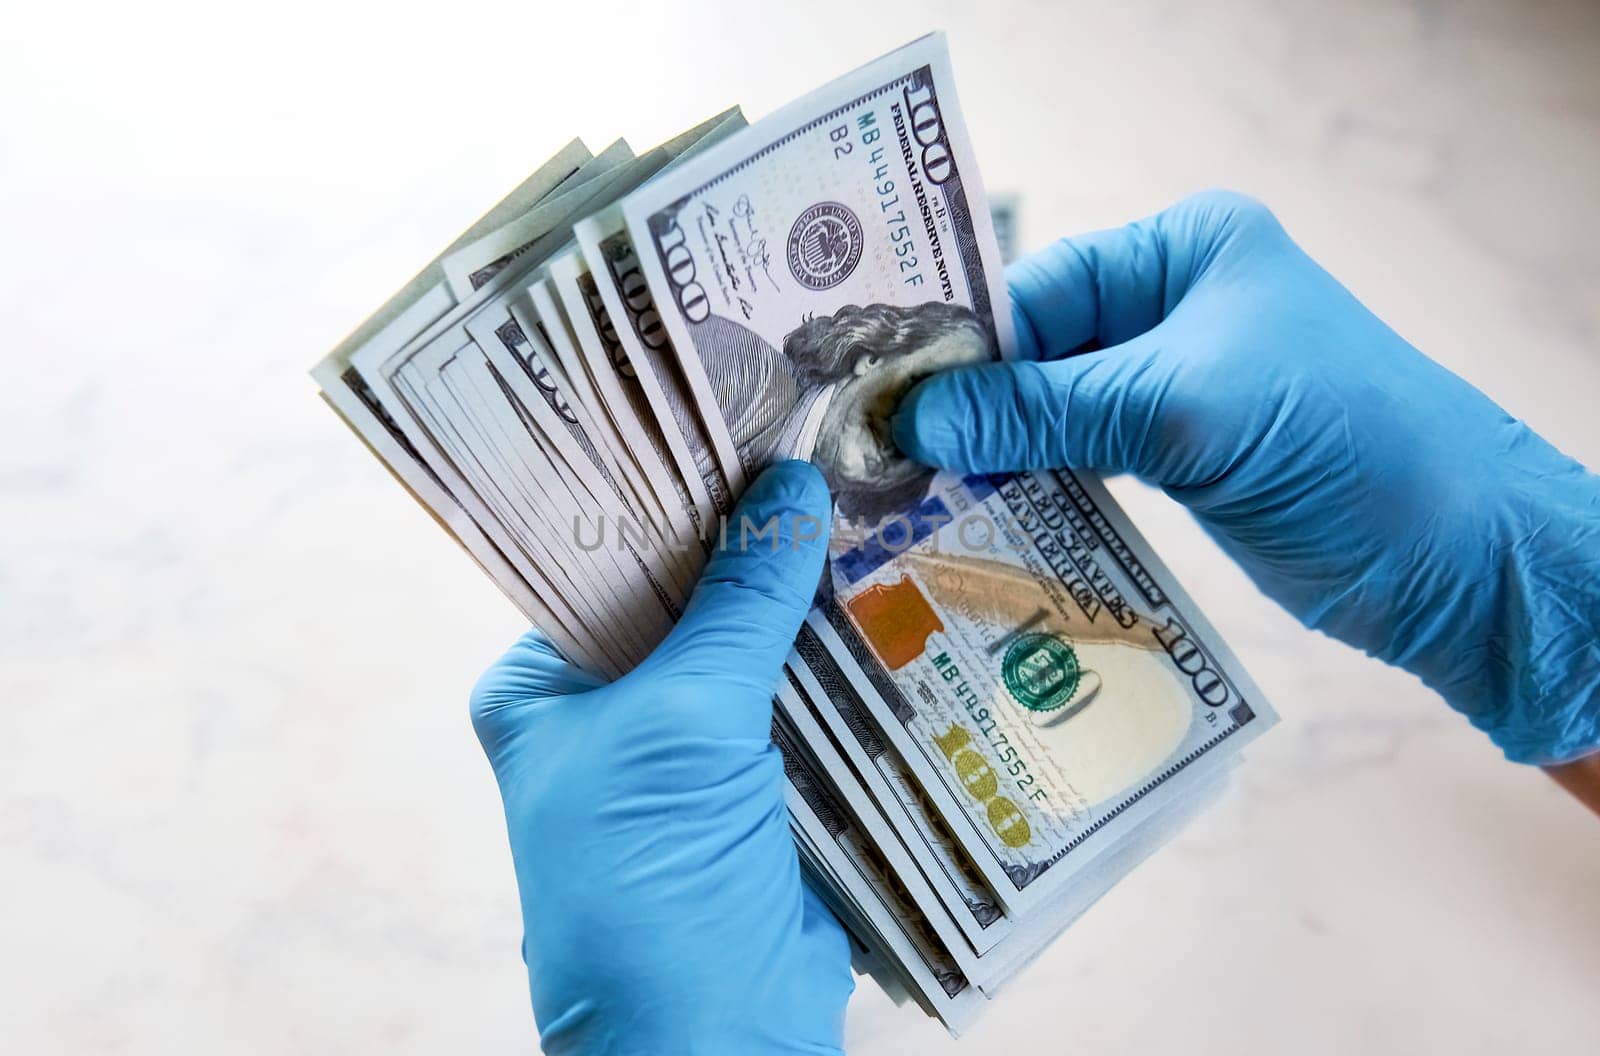 secure money transfer. hand in a rubber glove takes money. hands in sterile medical gloves.